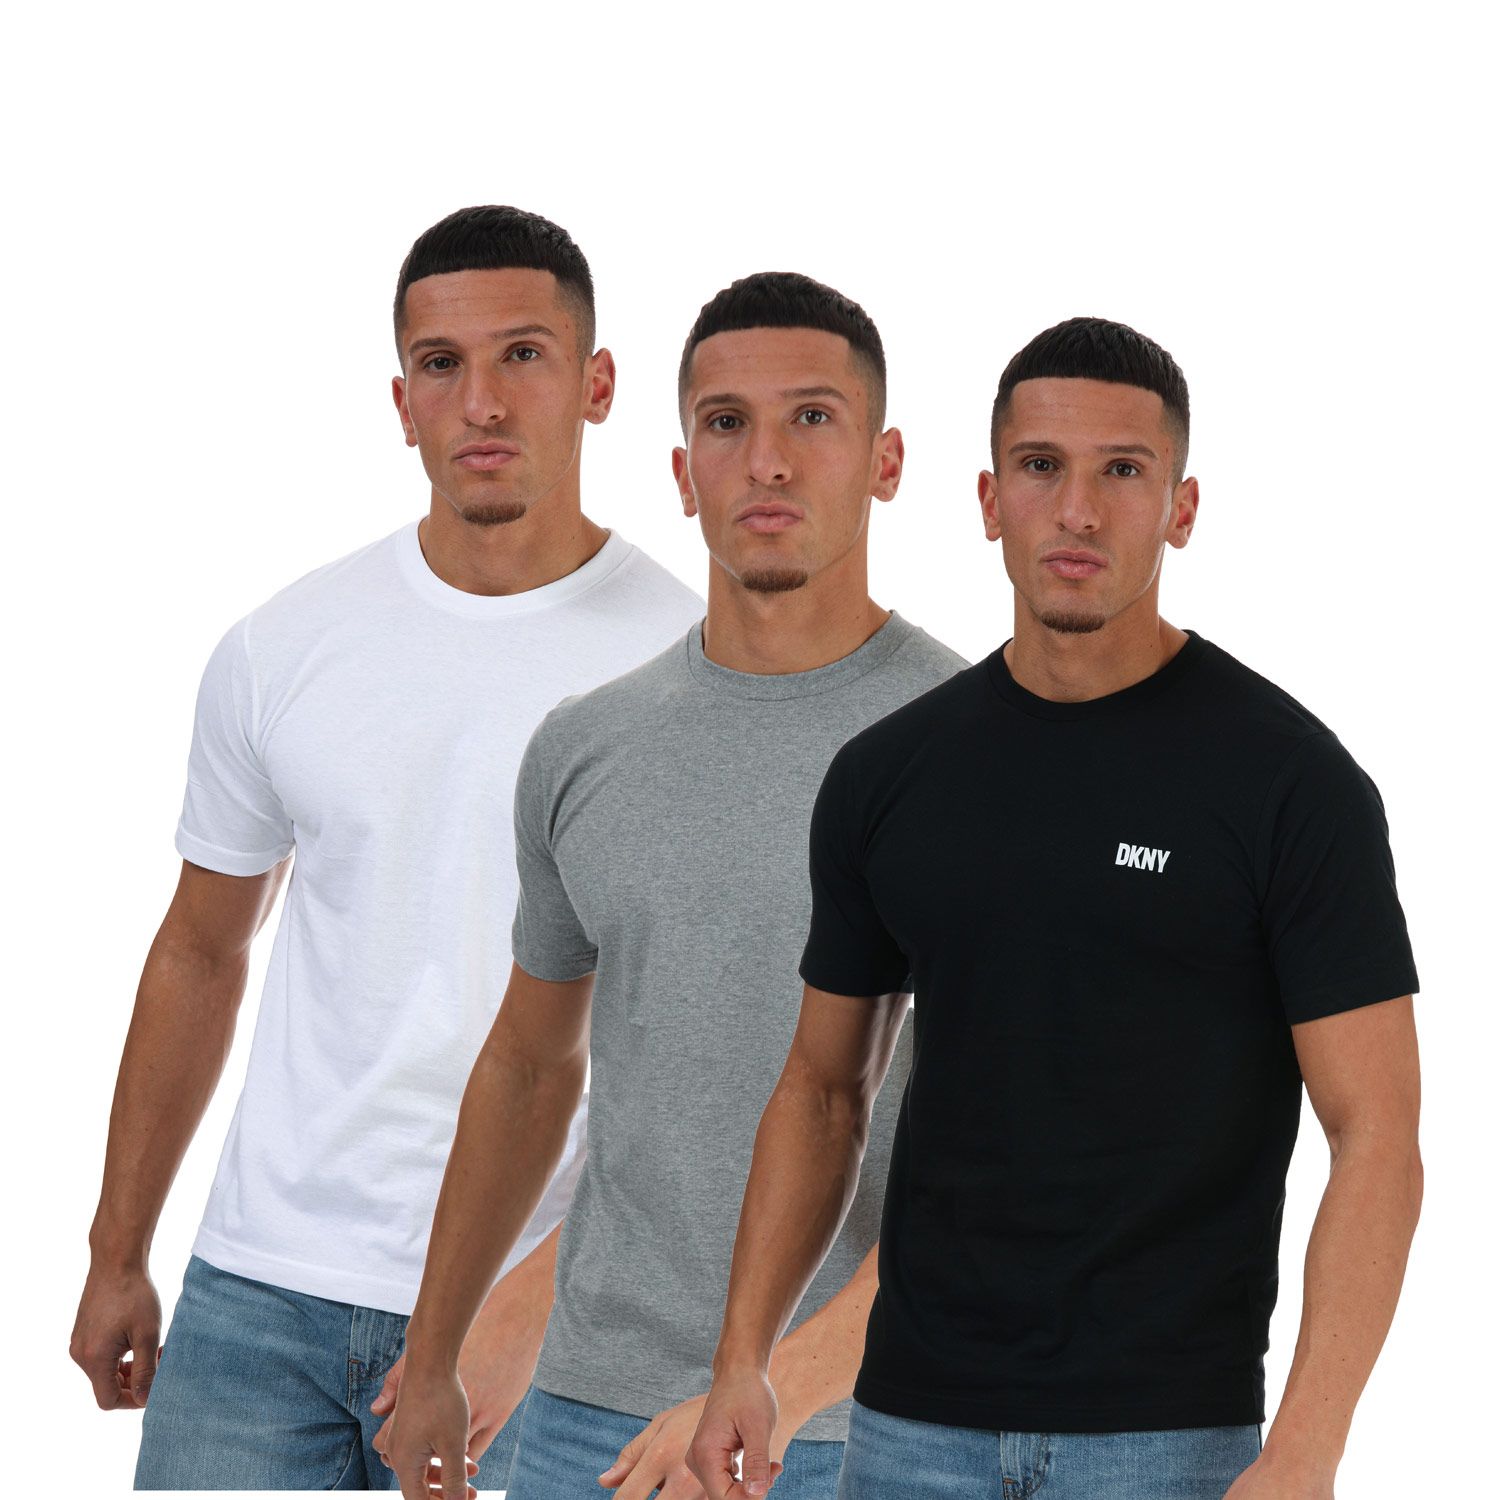 Black Grey White DKNY Mens The Get - Lounge T-Shirts 3 Pack Label Giants